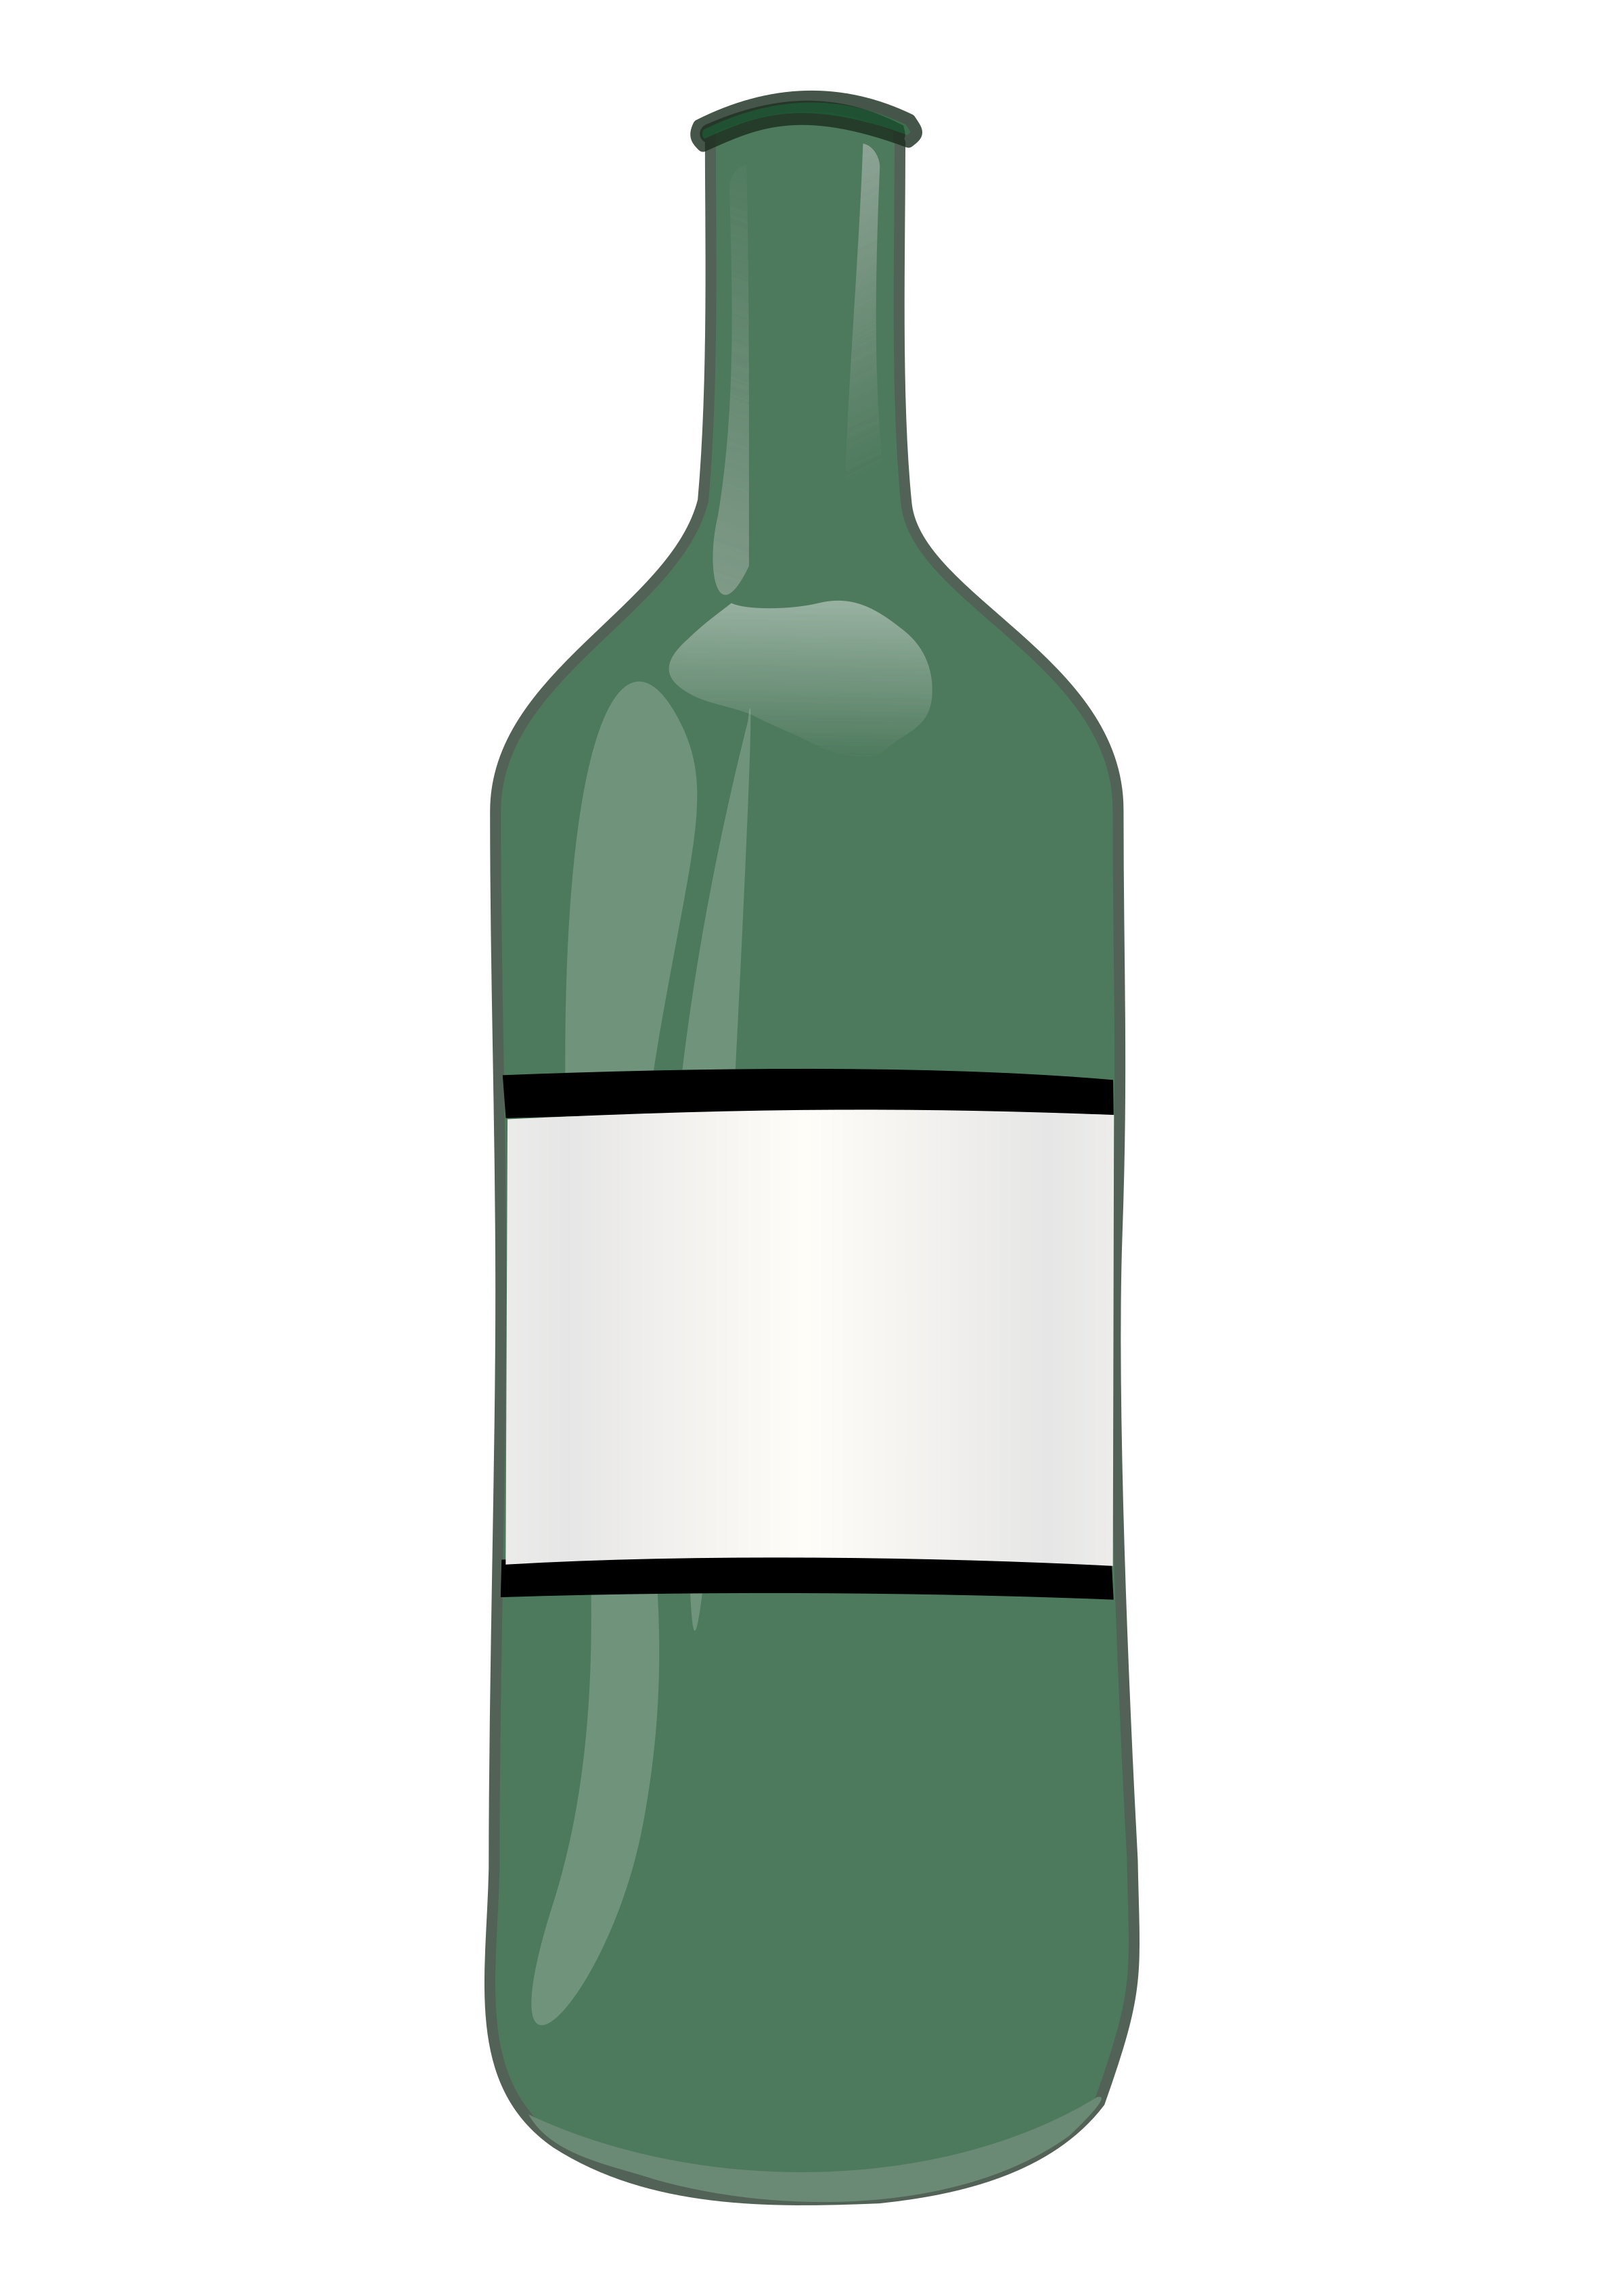 Cartoon Bottles Clipart - Cliparts and Others Art Inspiration